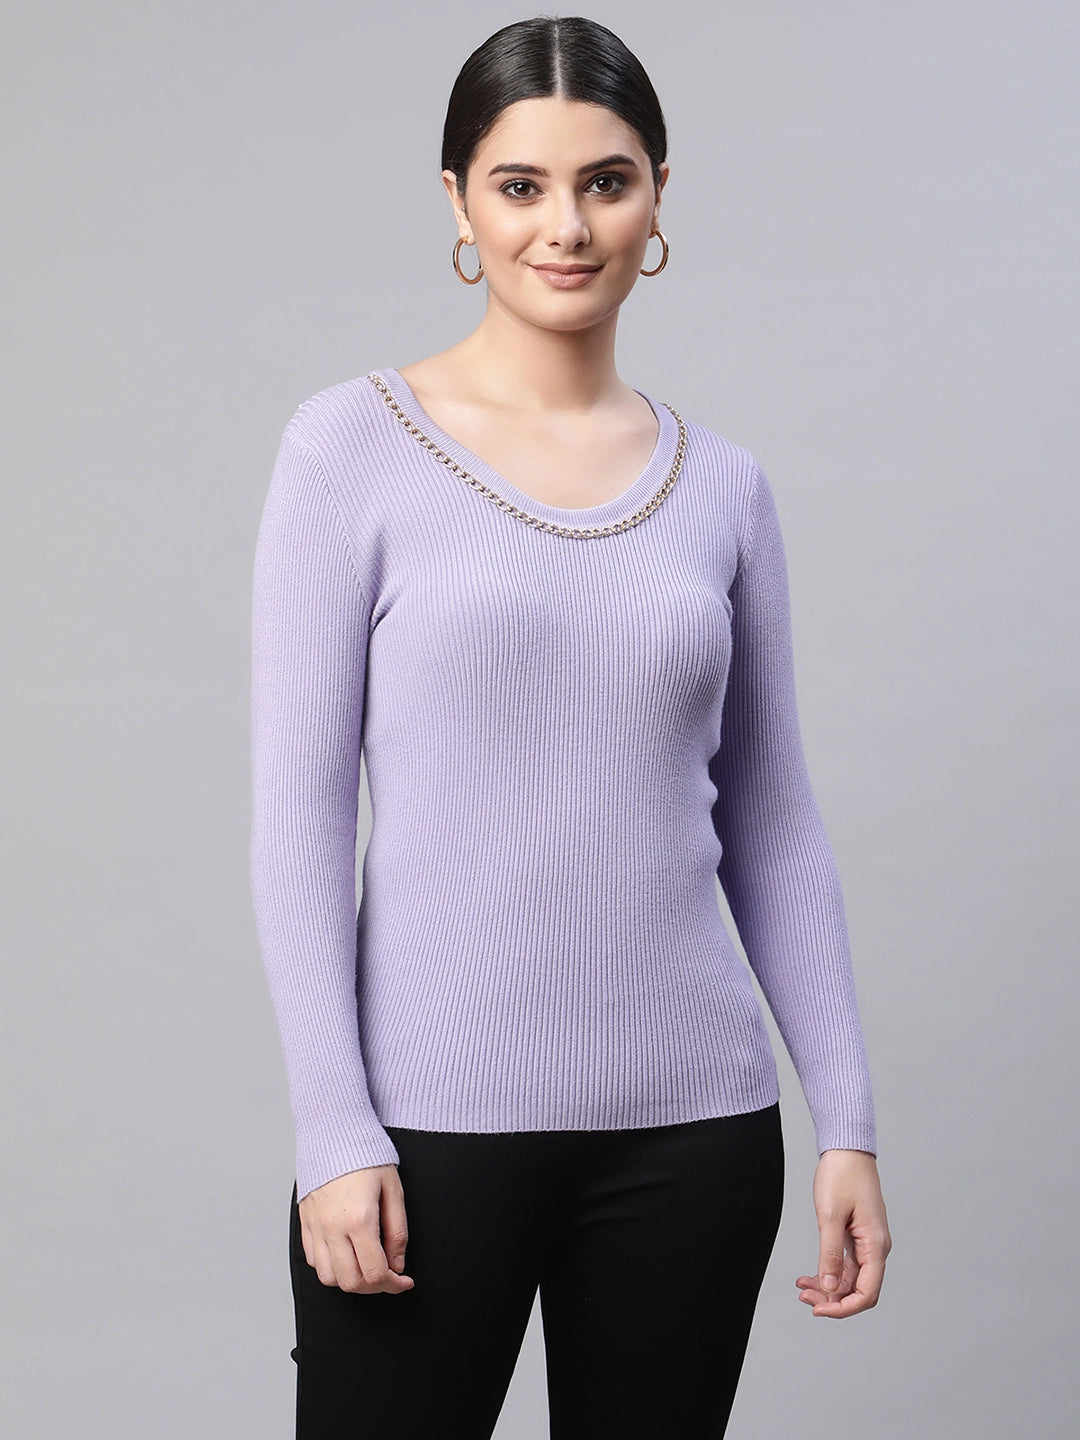 NECHOLOGY Womens Tops under Shirts Women Pullover India